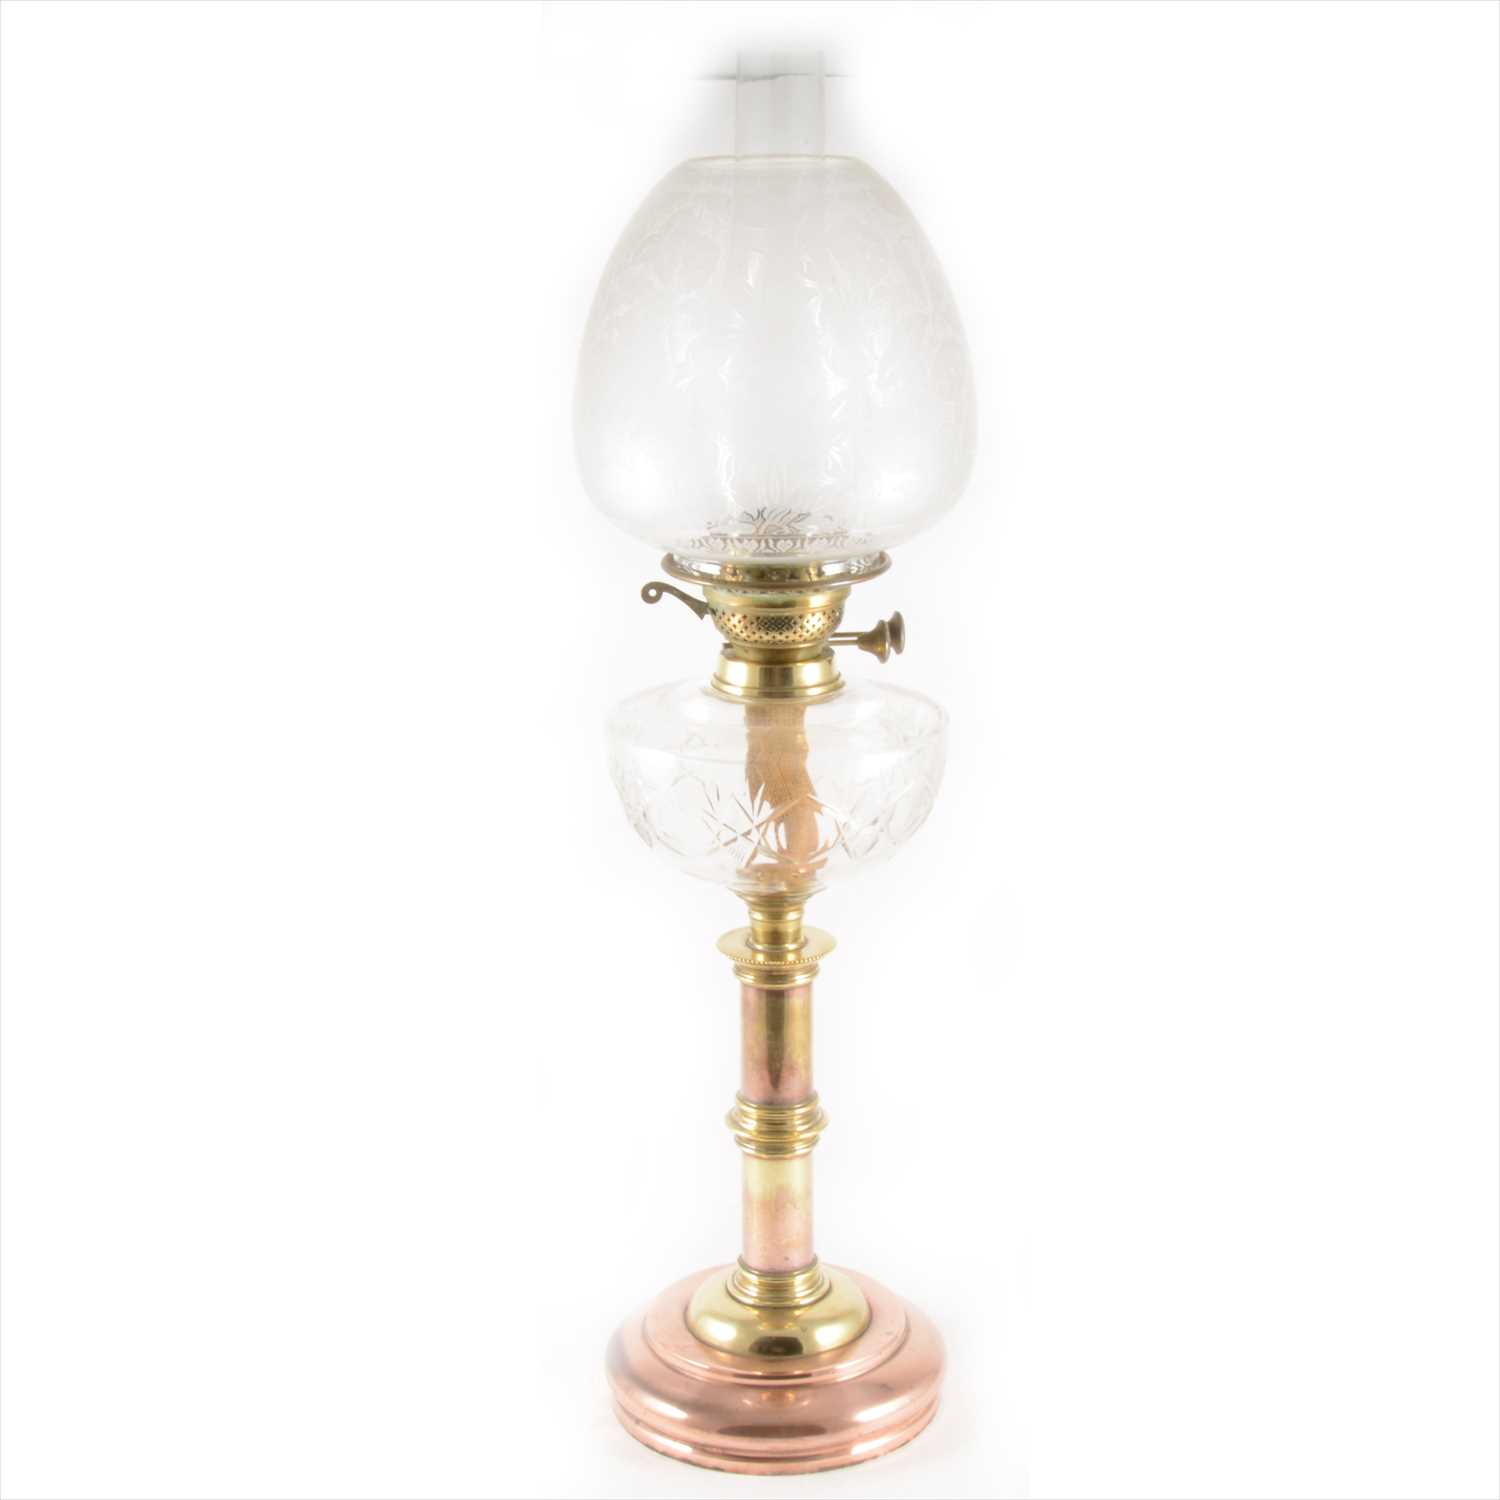 Lot 142 - Edwardian copper and brass table oil lamp with glass reservoir, original etched glass shade.